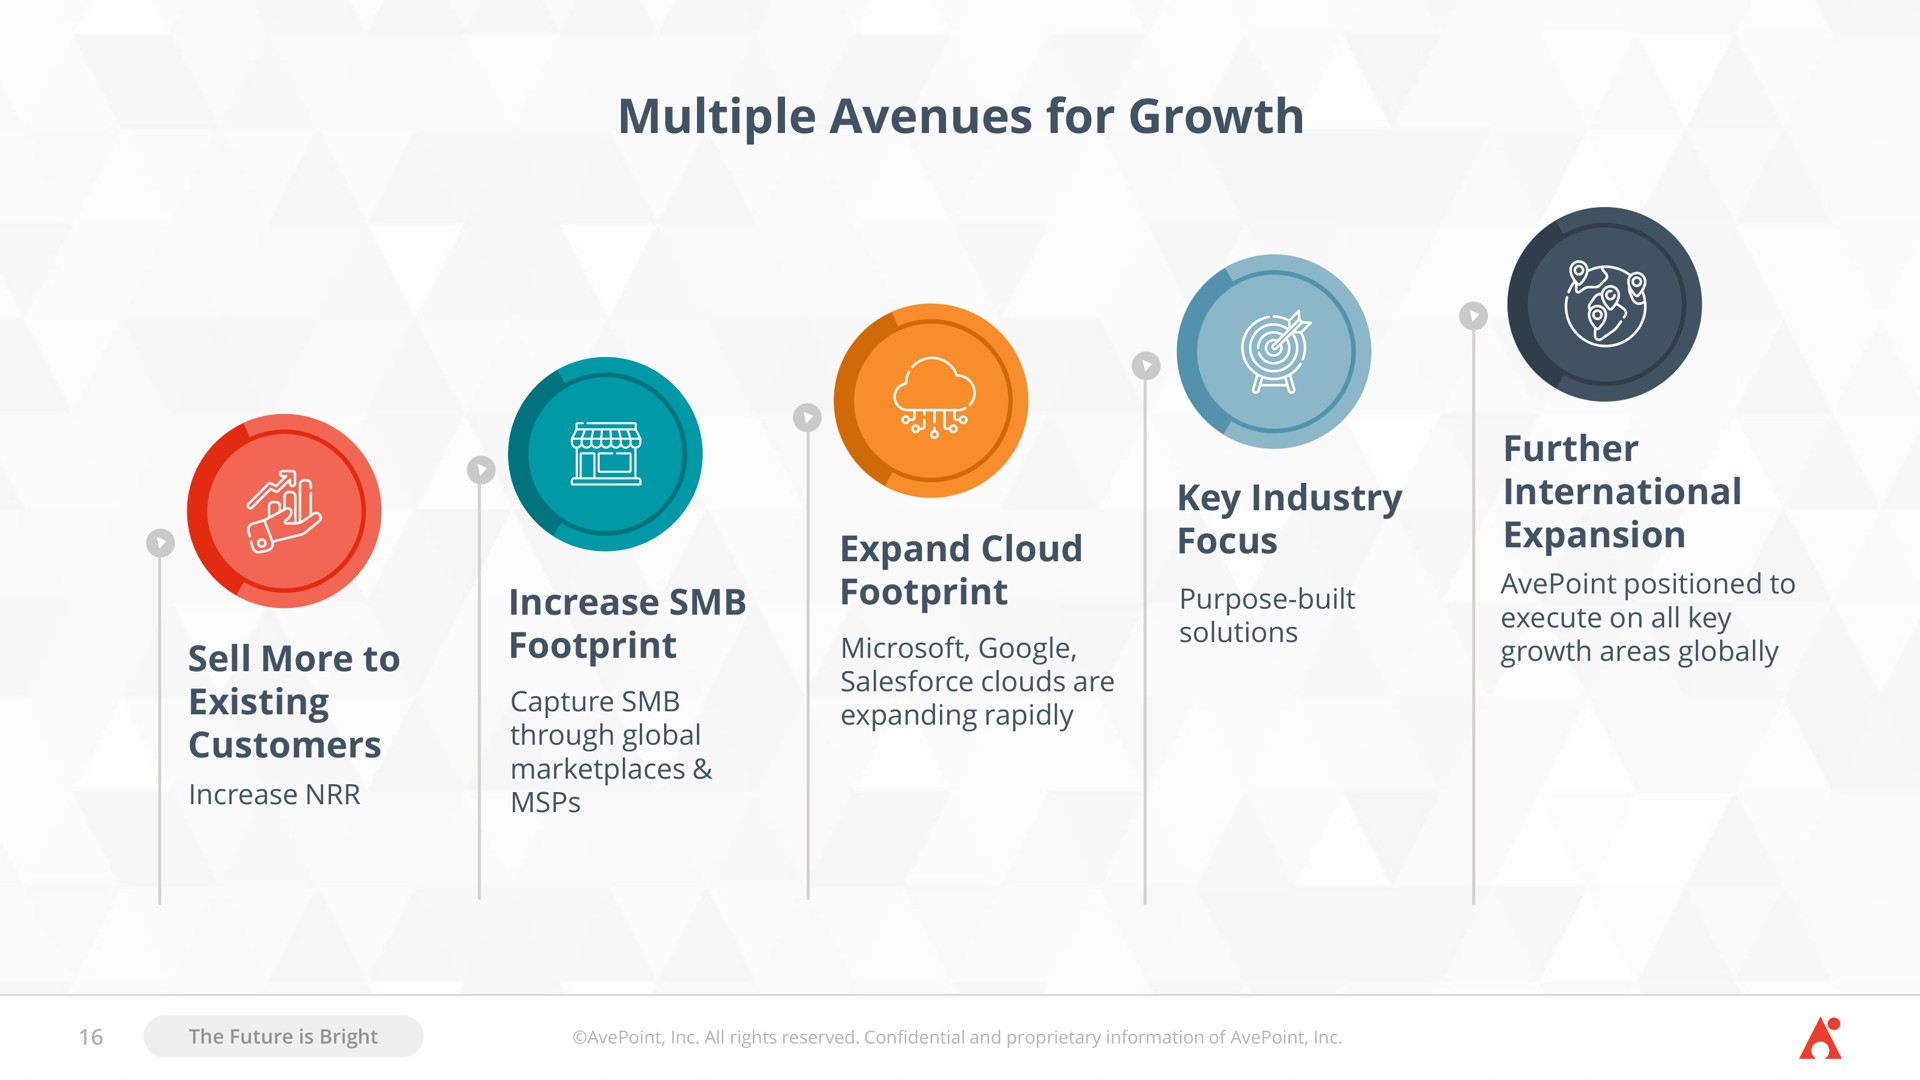 multiple avenues for growth i a key industry focus purpose built expand cloud footprint expanding rapidly further international expansion a sell more to existing customers increase footprint through global | AvePoint